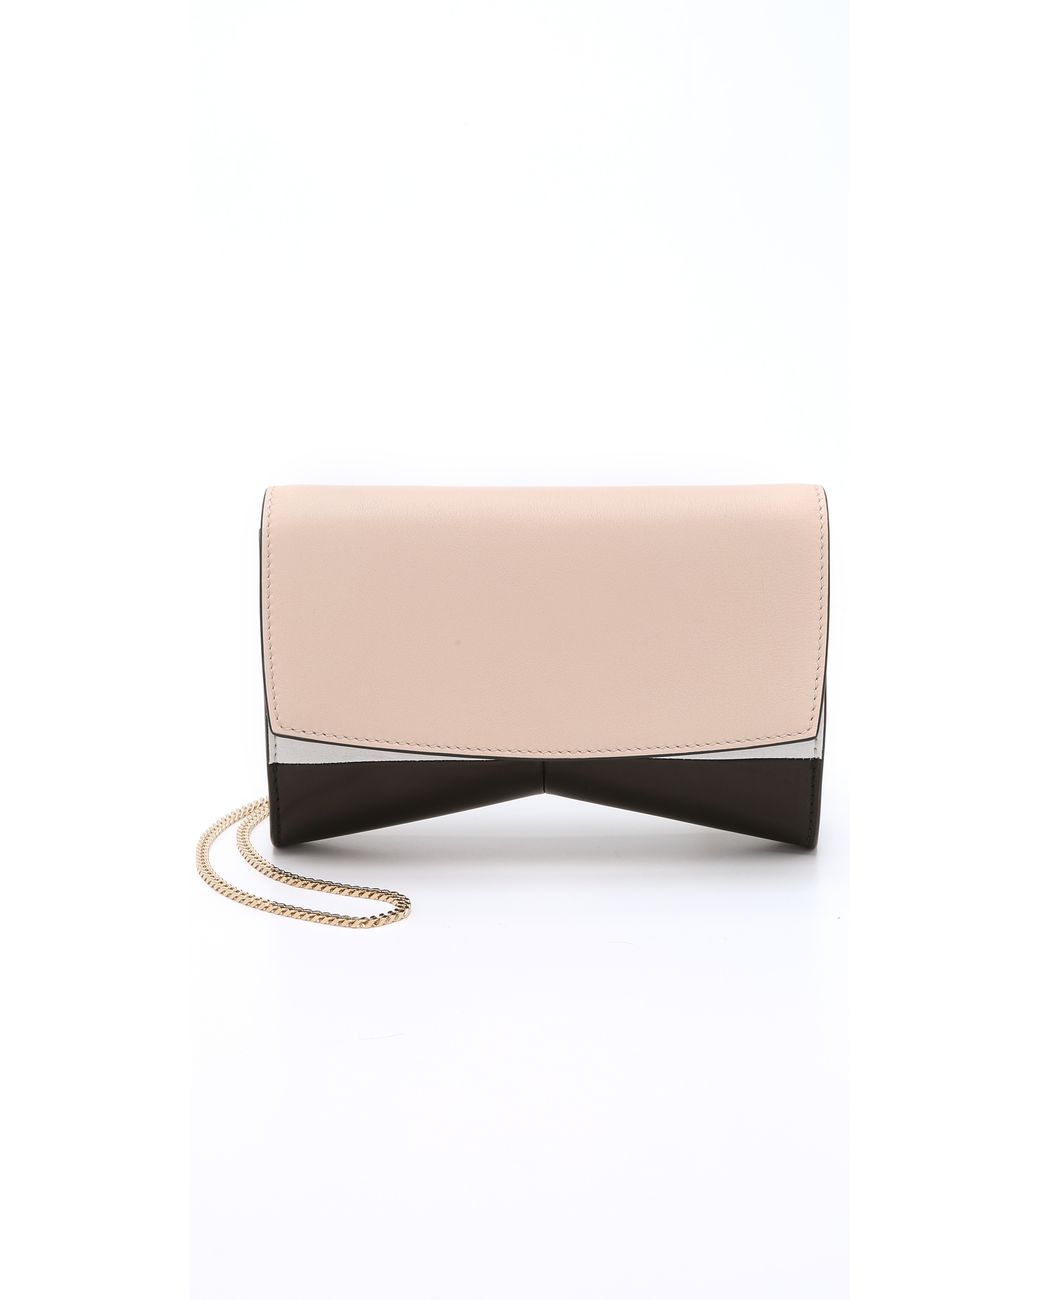 Annie's Finds Camel Leather Foldover Crossbody Clutch with Ruffle